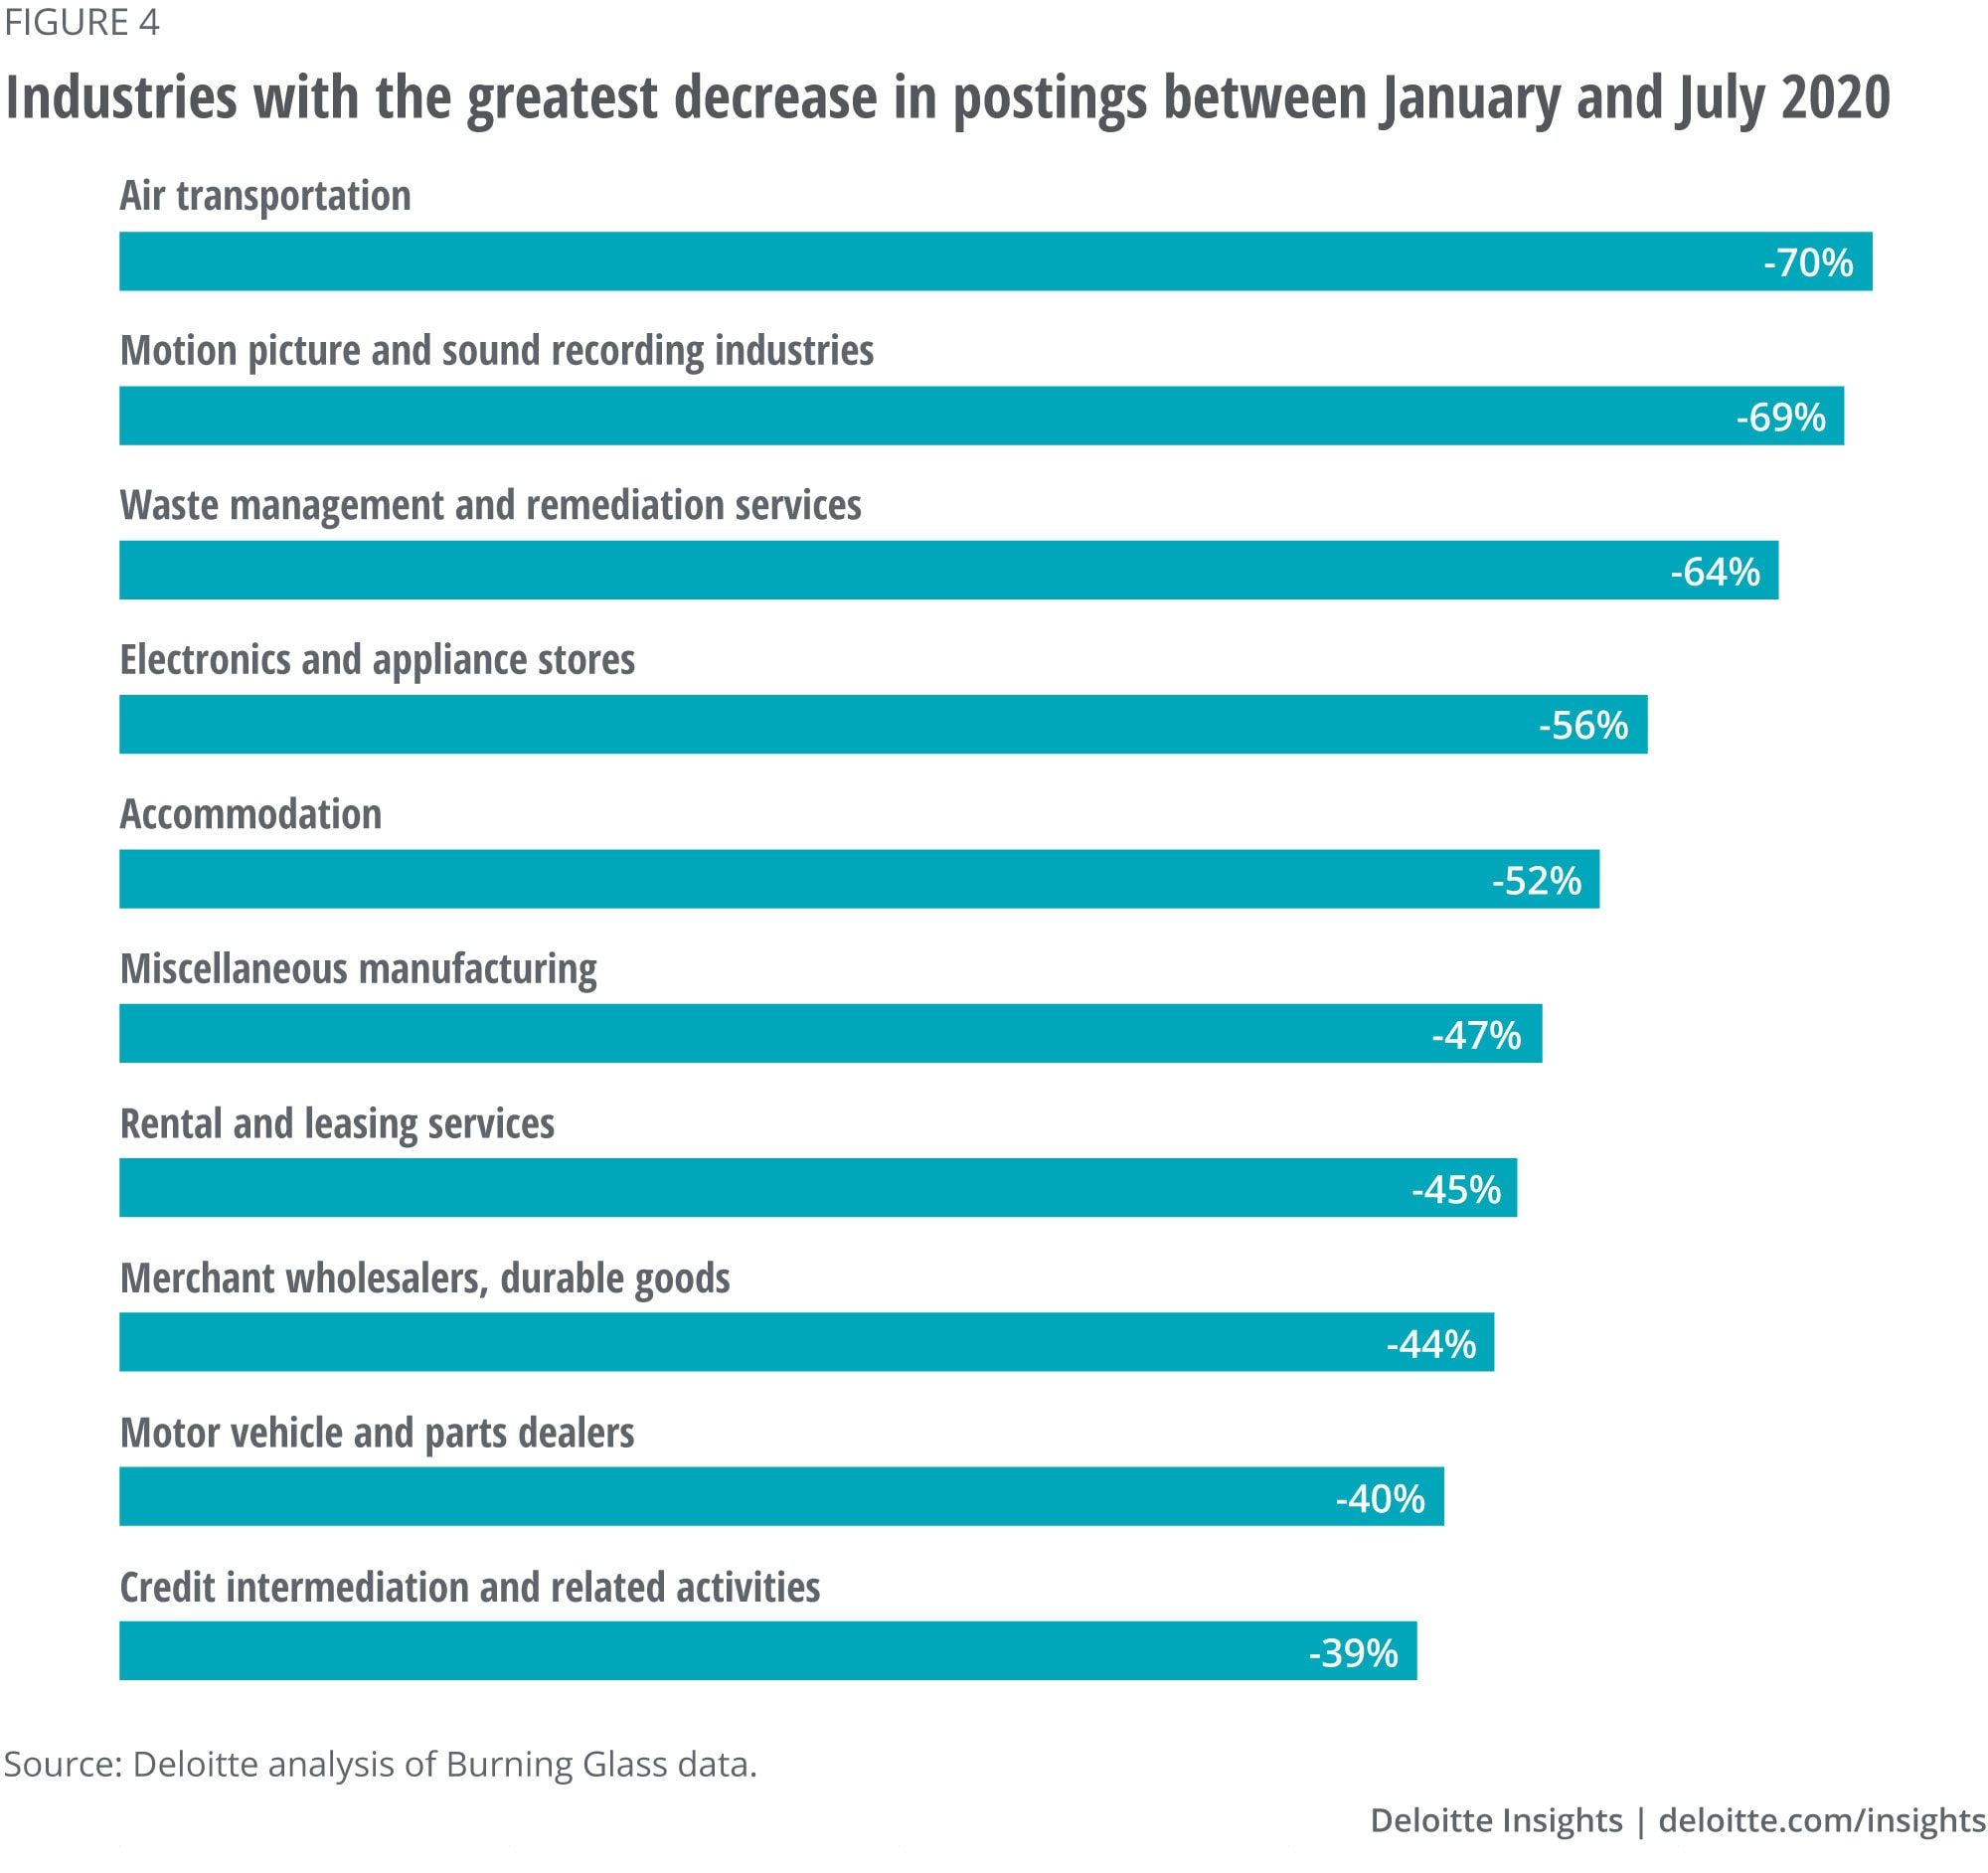 Industries with the greatest decrease in postings between January and July 2020